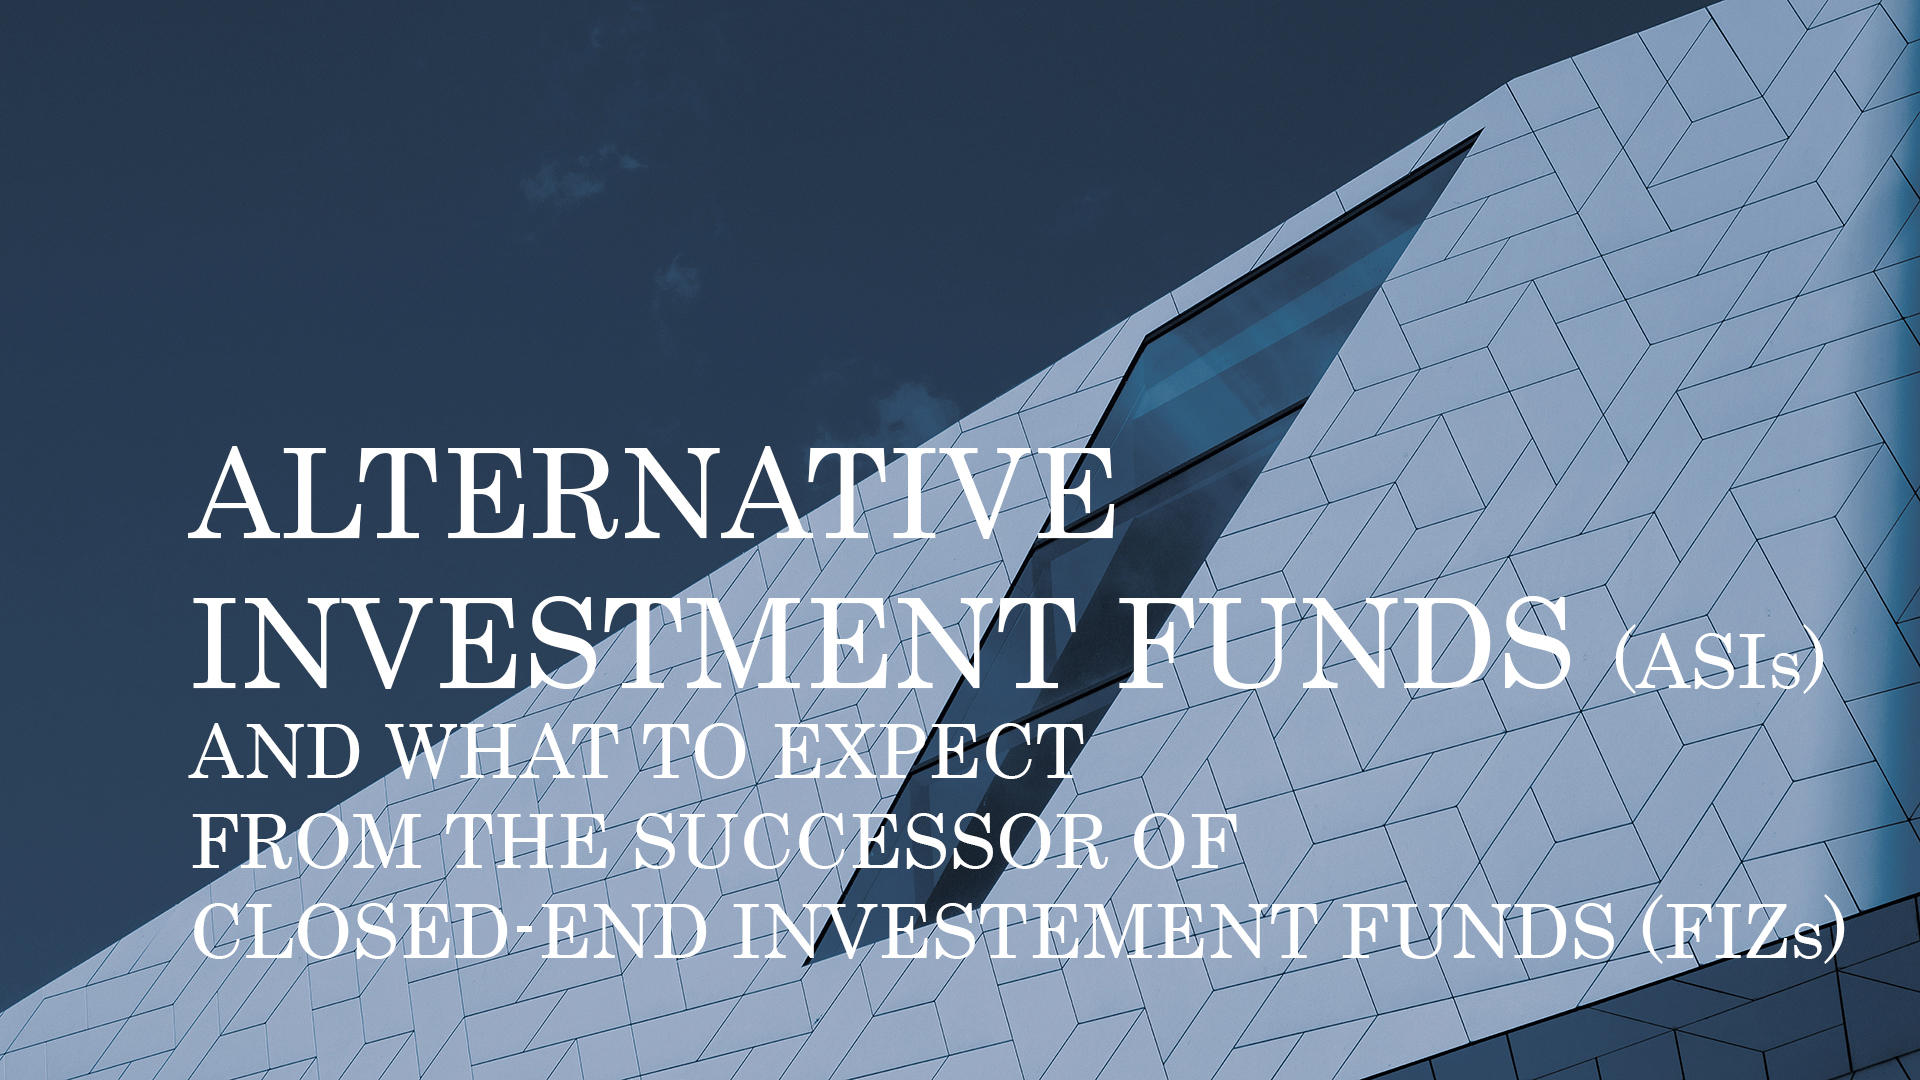 ALTERNATIVE INVESTMENT FUNDS (AIFs) IN PRACTICE